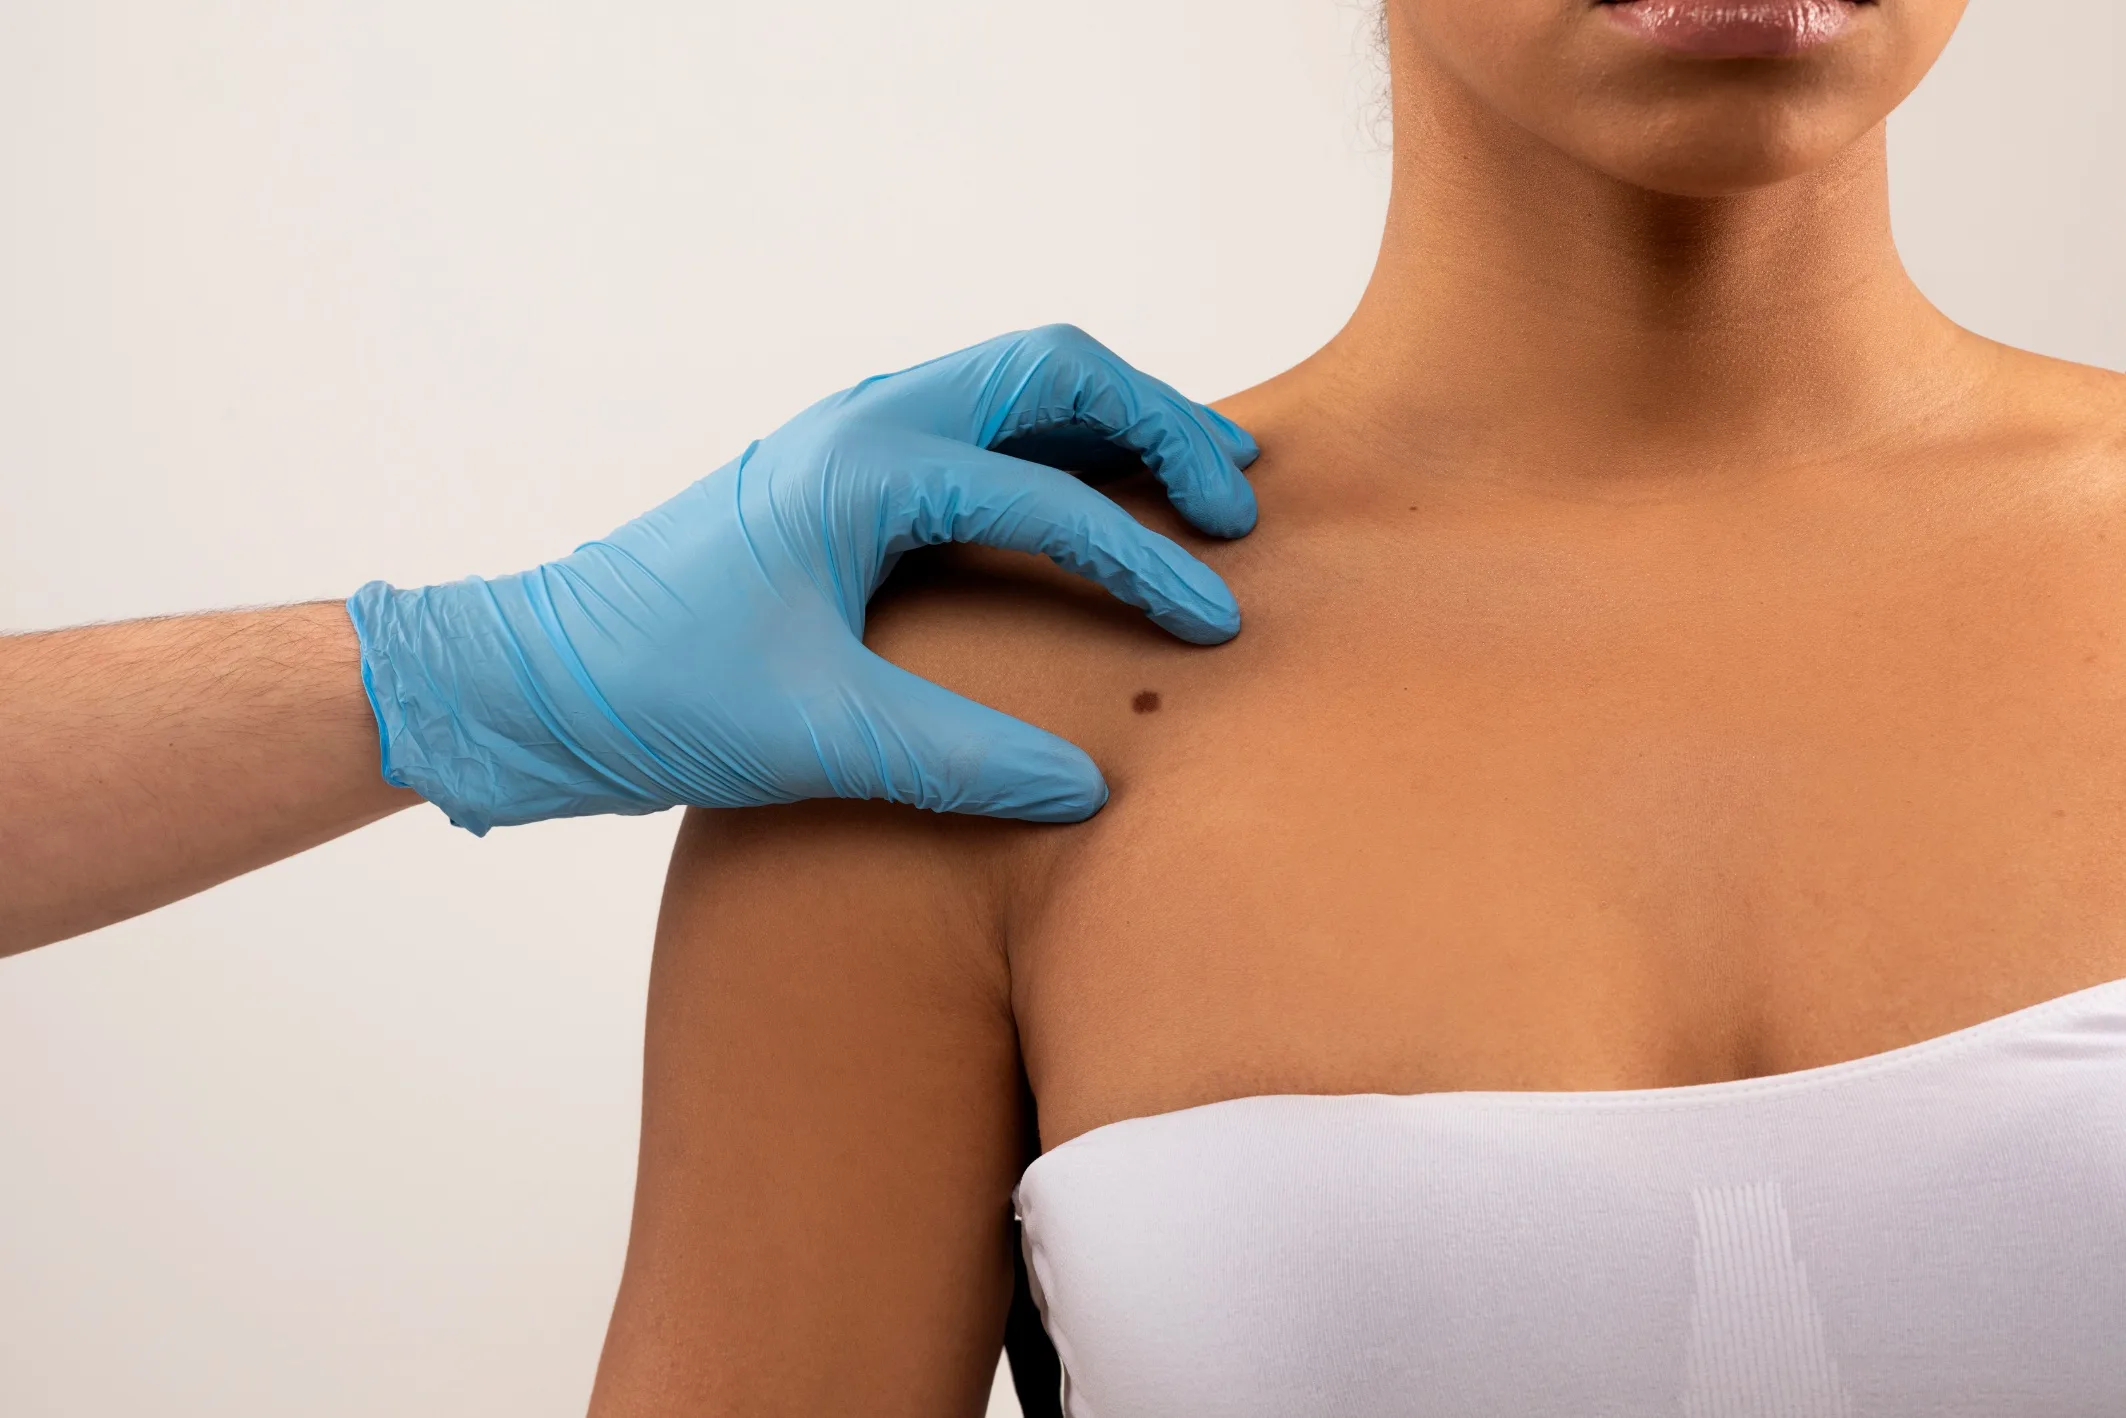 How to Spot Melanoma: The 5 Warning Signs You Should Not Ignore